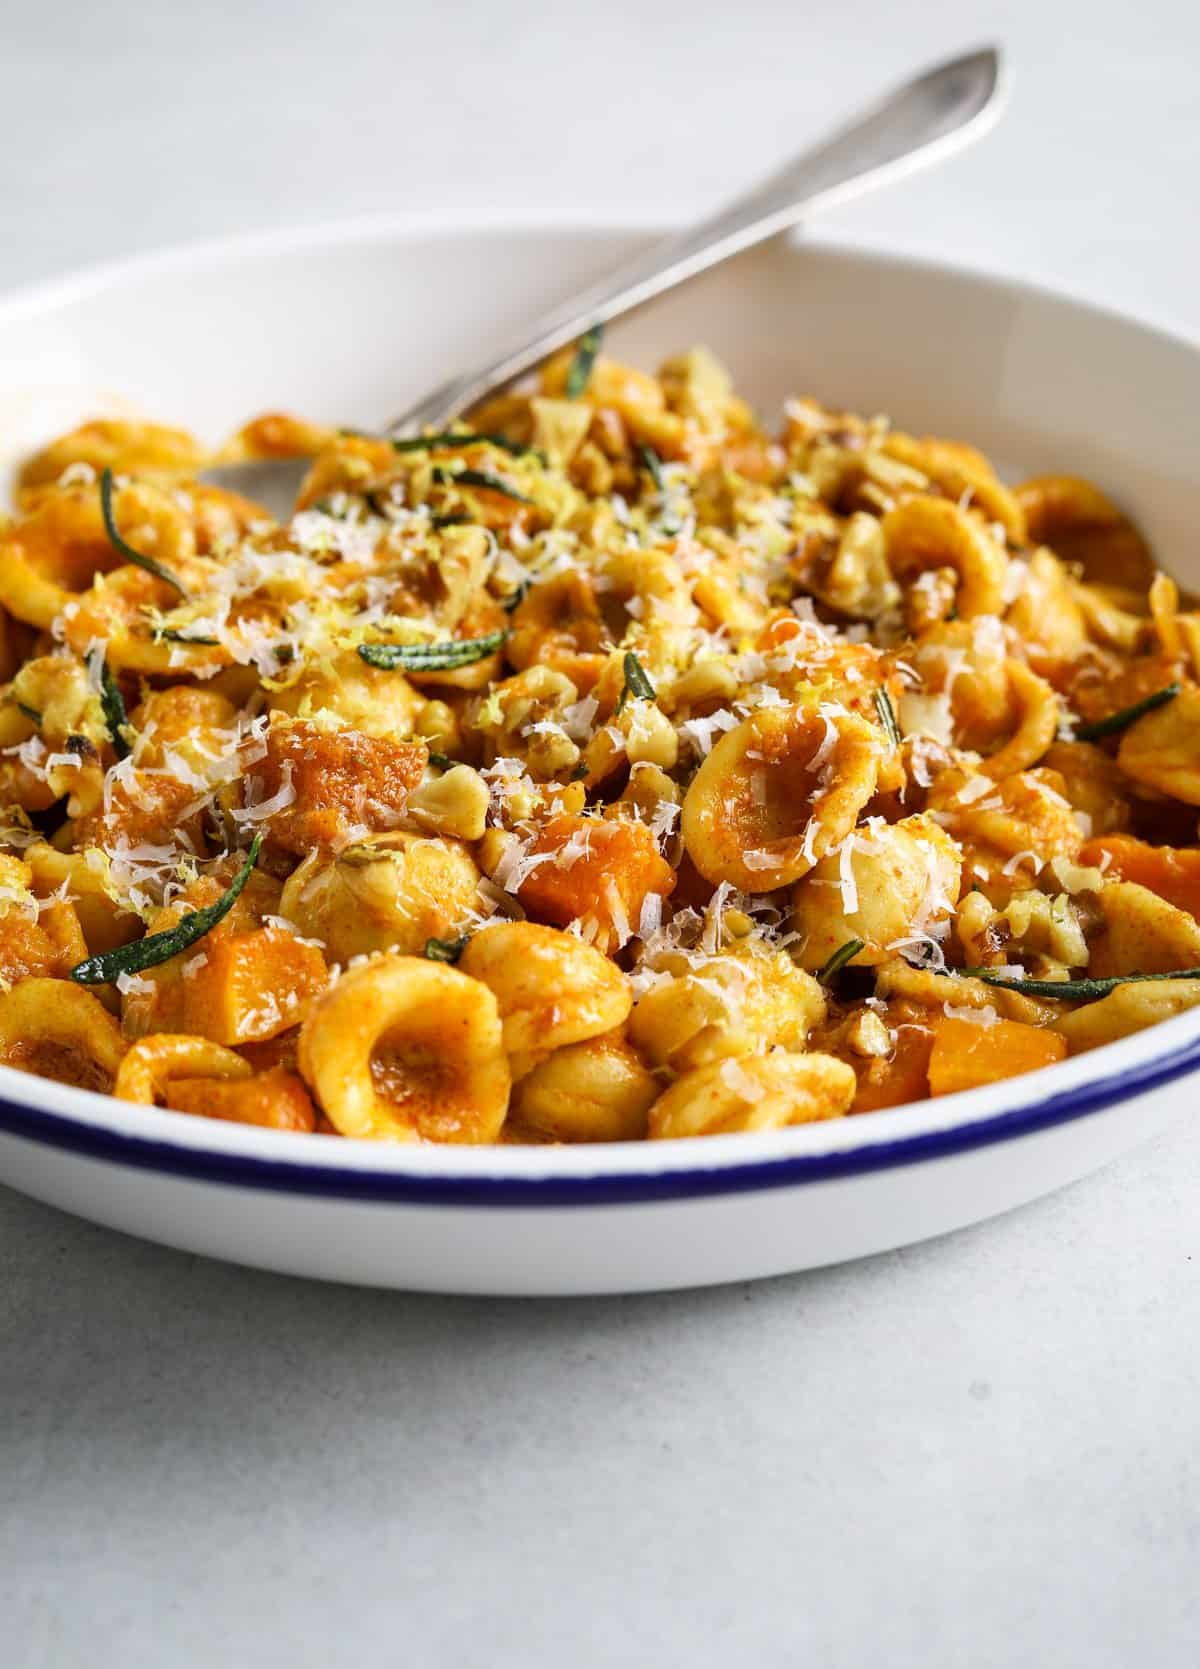 A close of of a bowl of orecchiette pasta with squash, rosemary and walnuts.